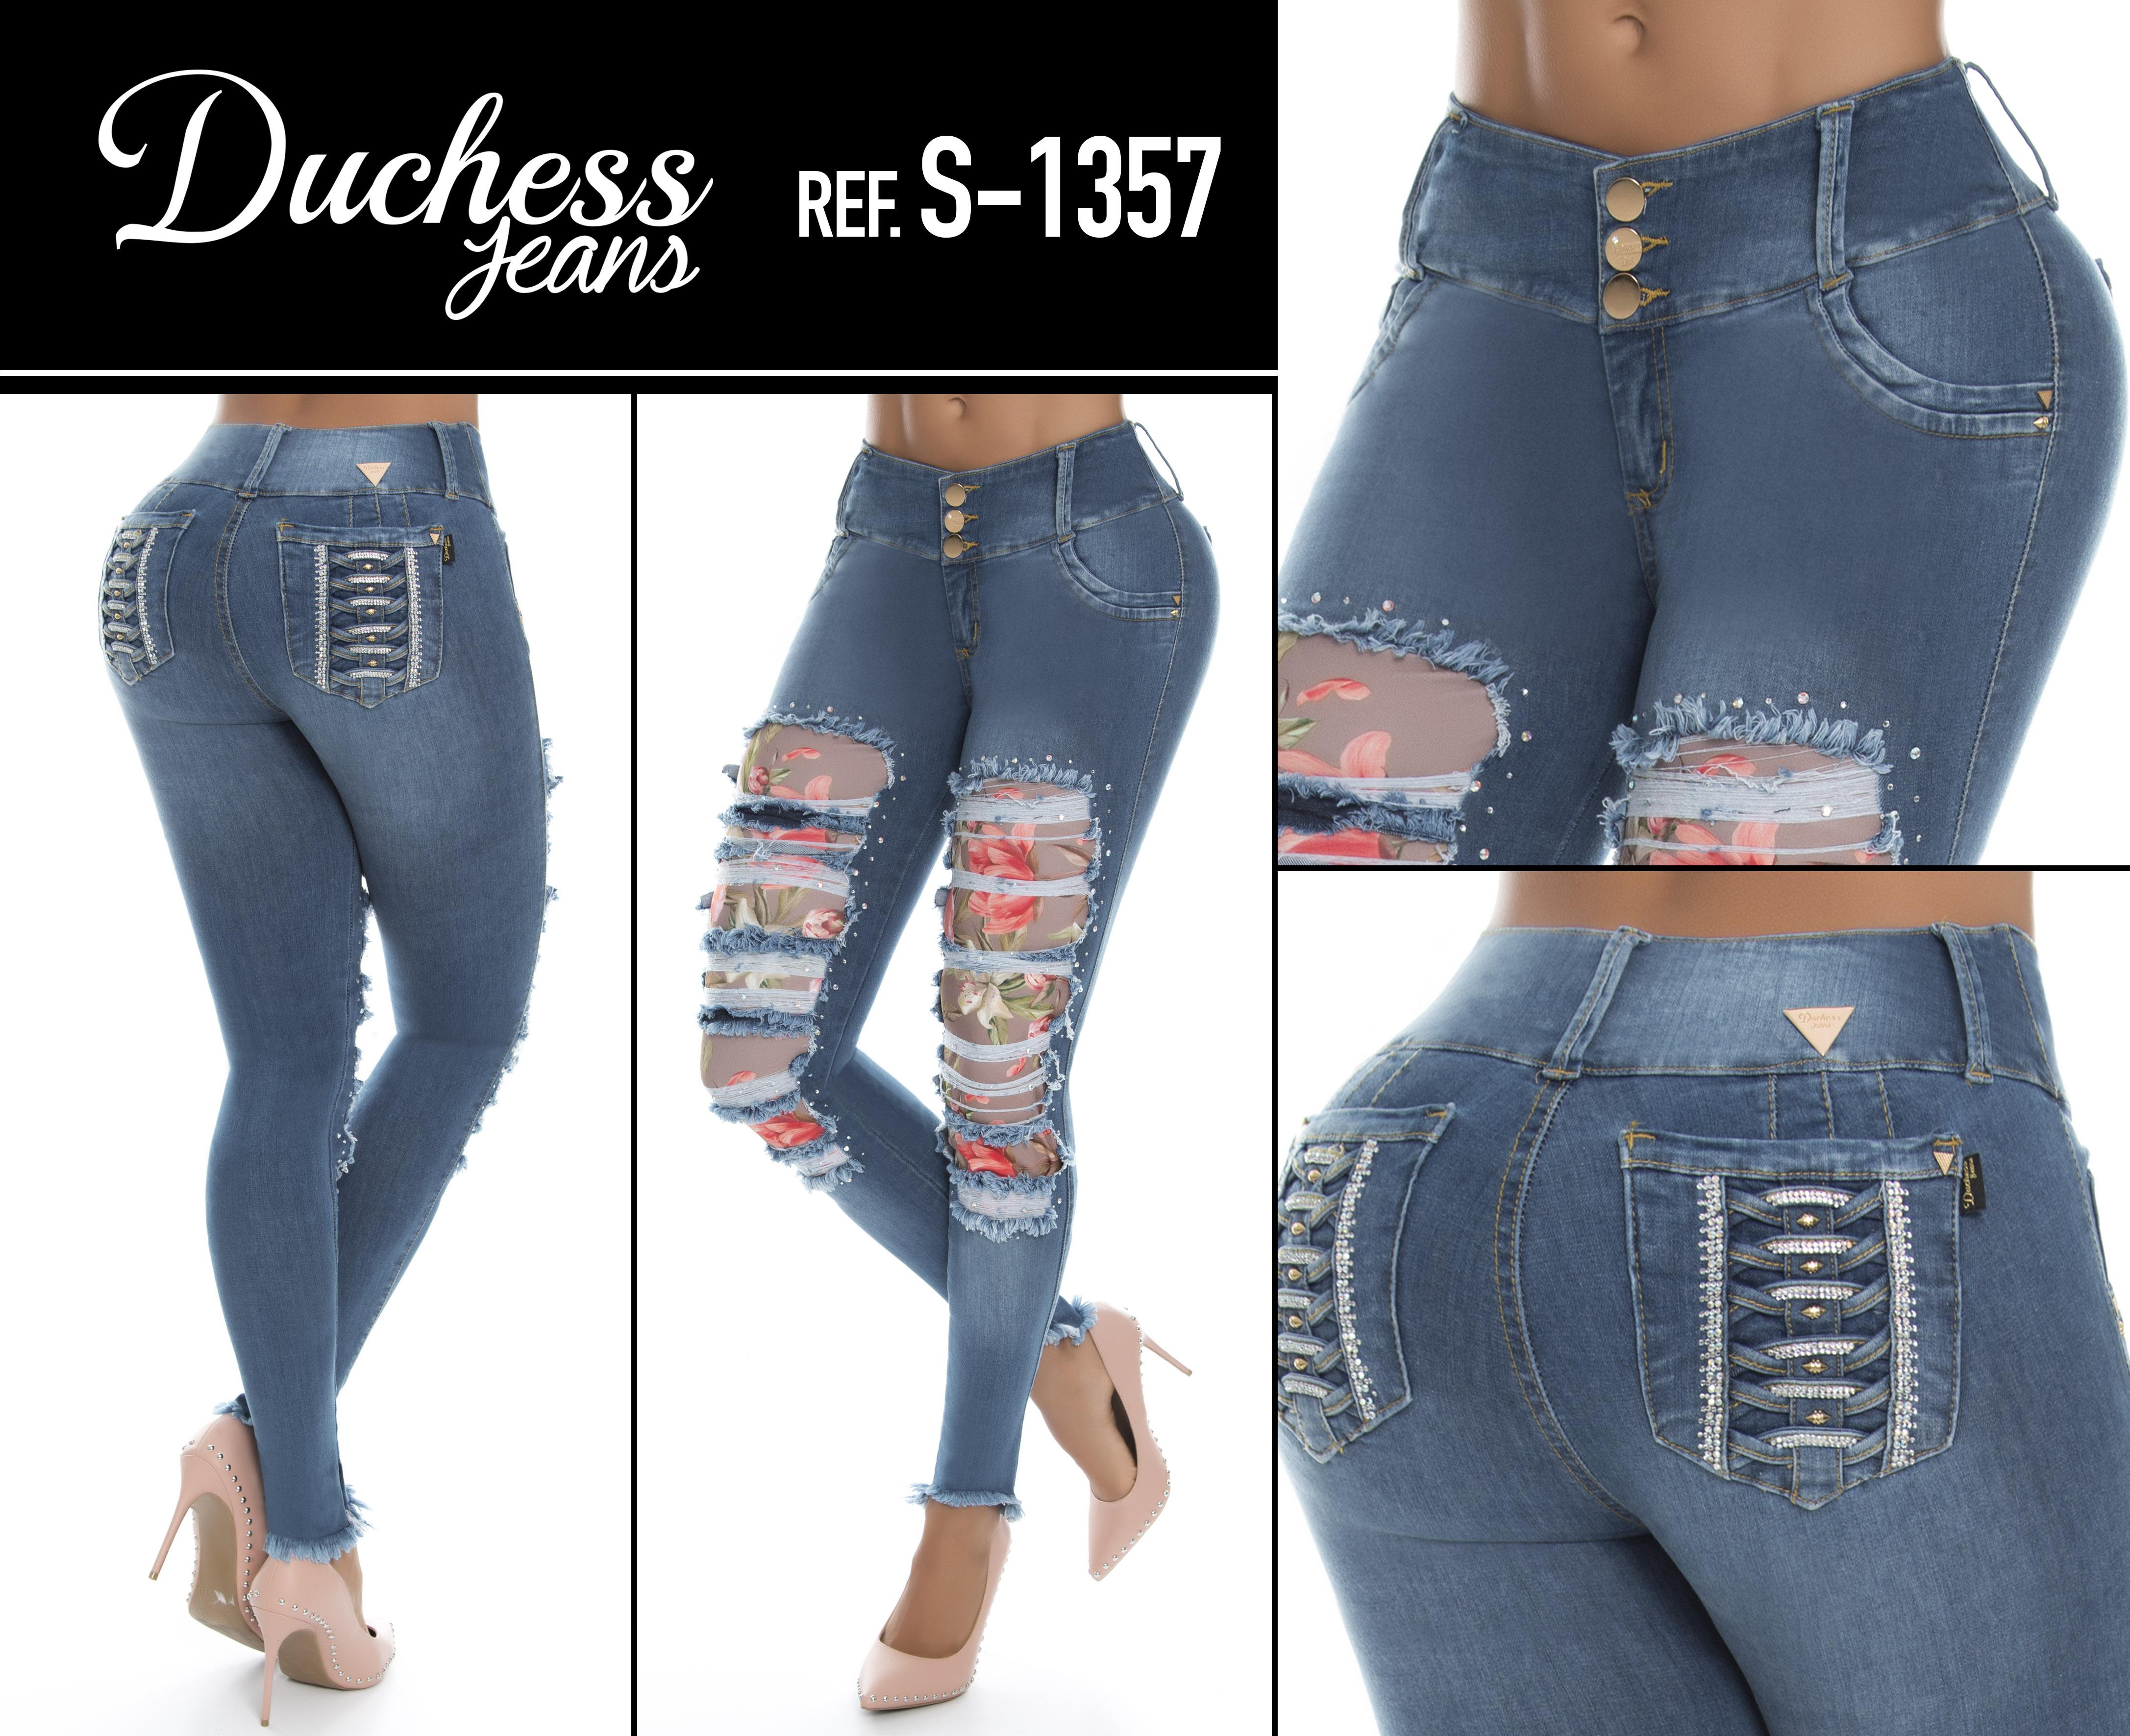 Jean Push Up Colombiano With Wear Decorated On Legs